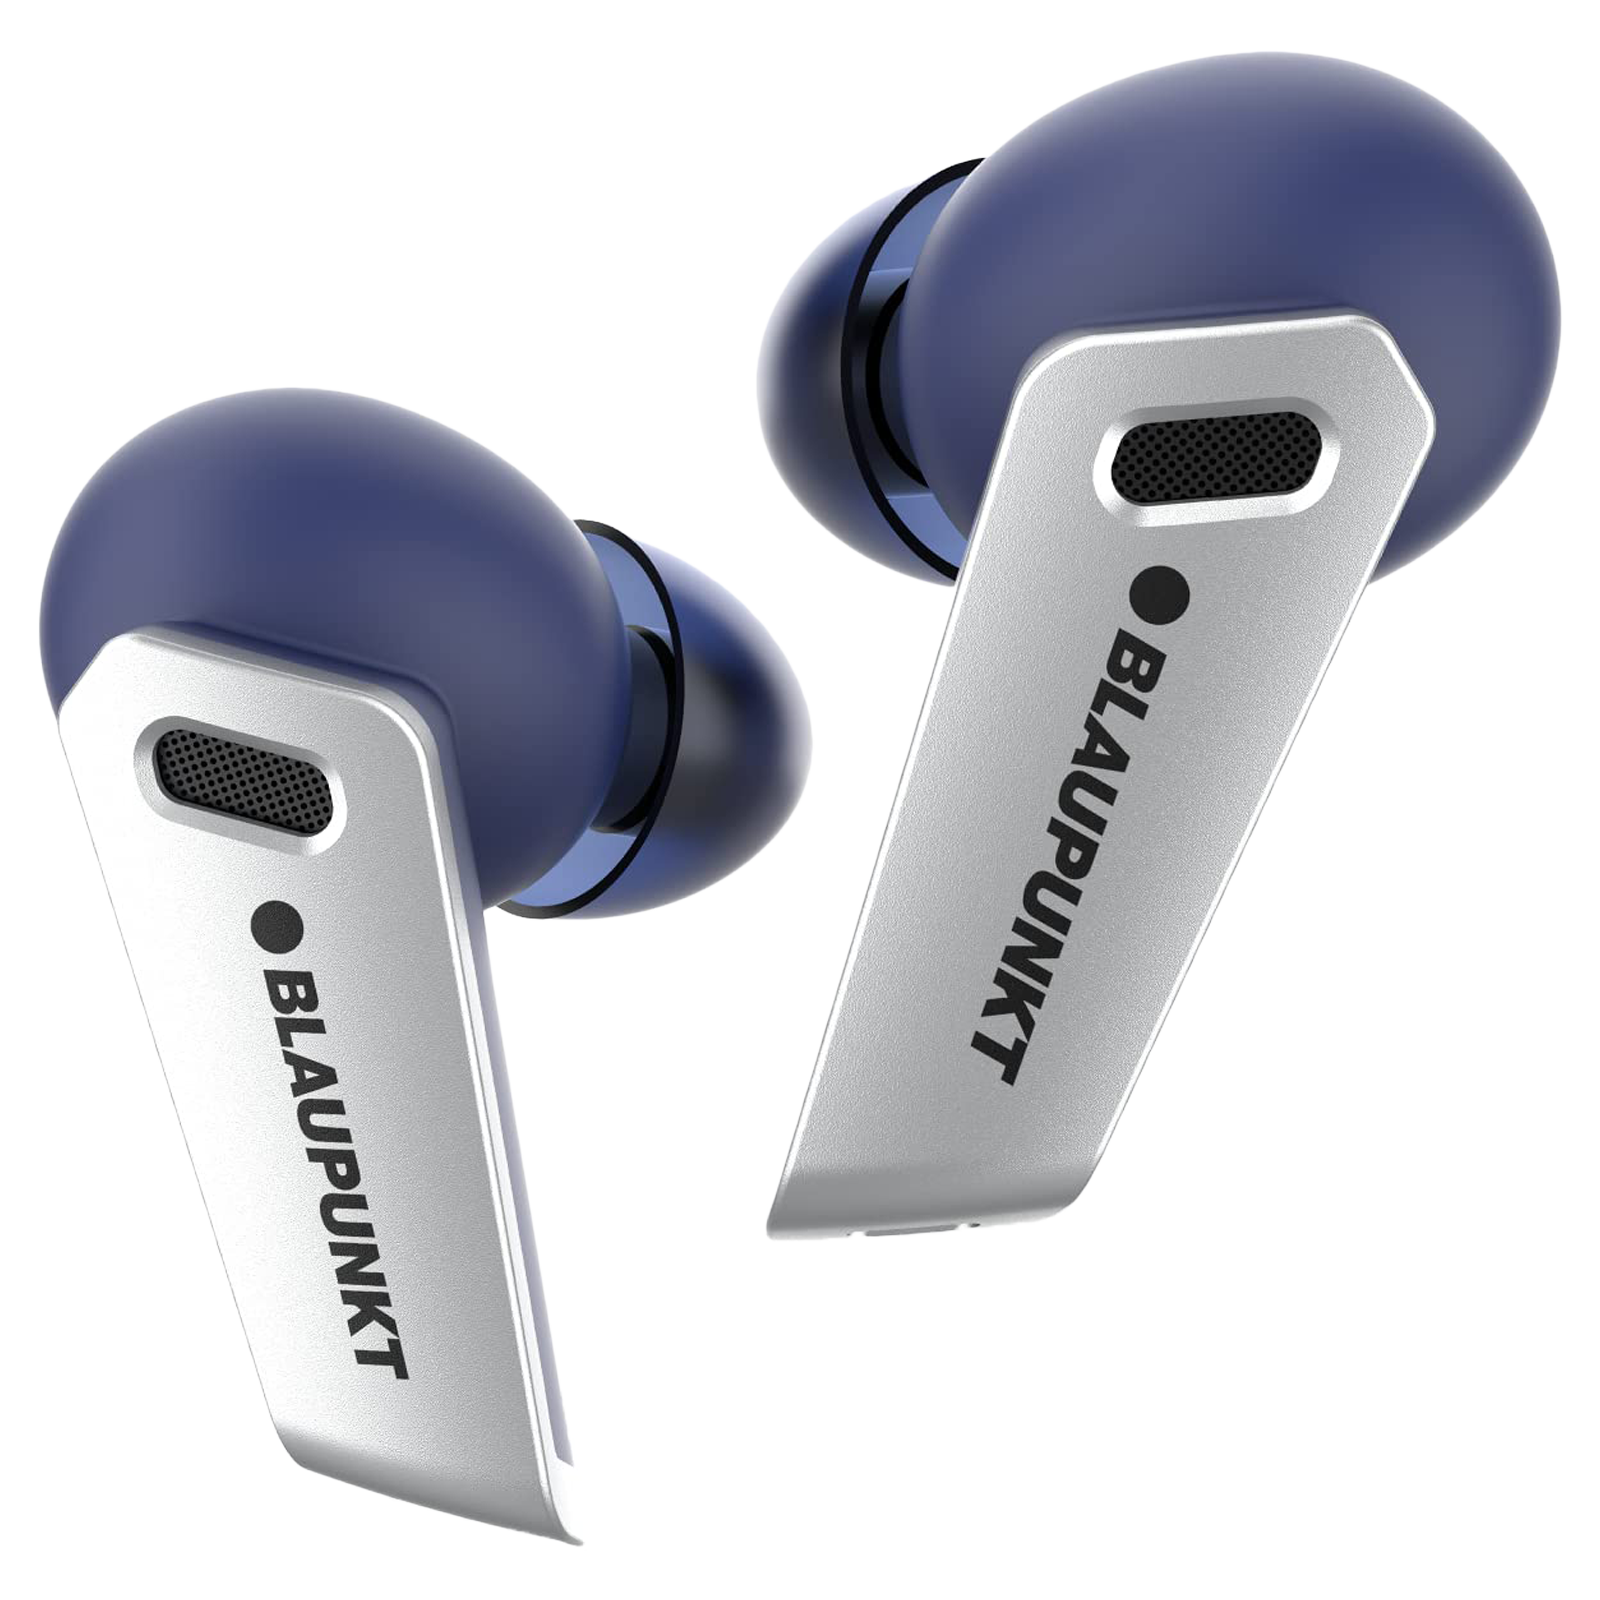 Blaupunkt BTW300 TWS Earbuds with Environmental Noise Cancellation (IPX5 Sweat Resistant, TurboVolt Charging, Blue)